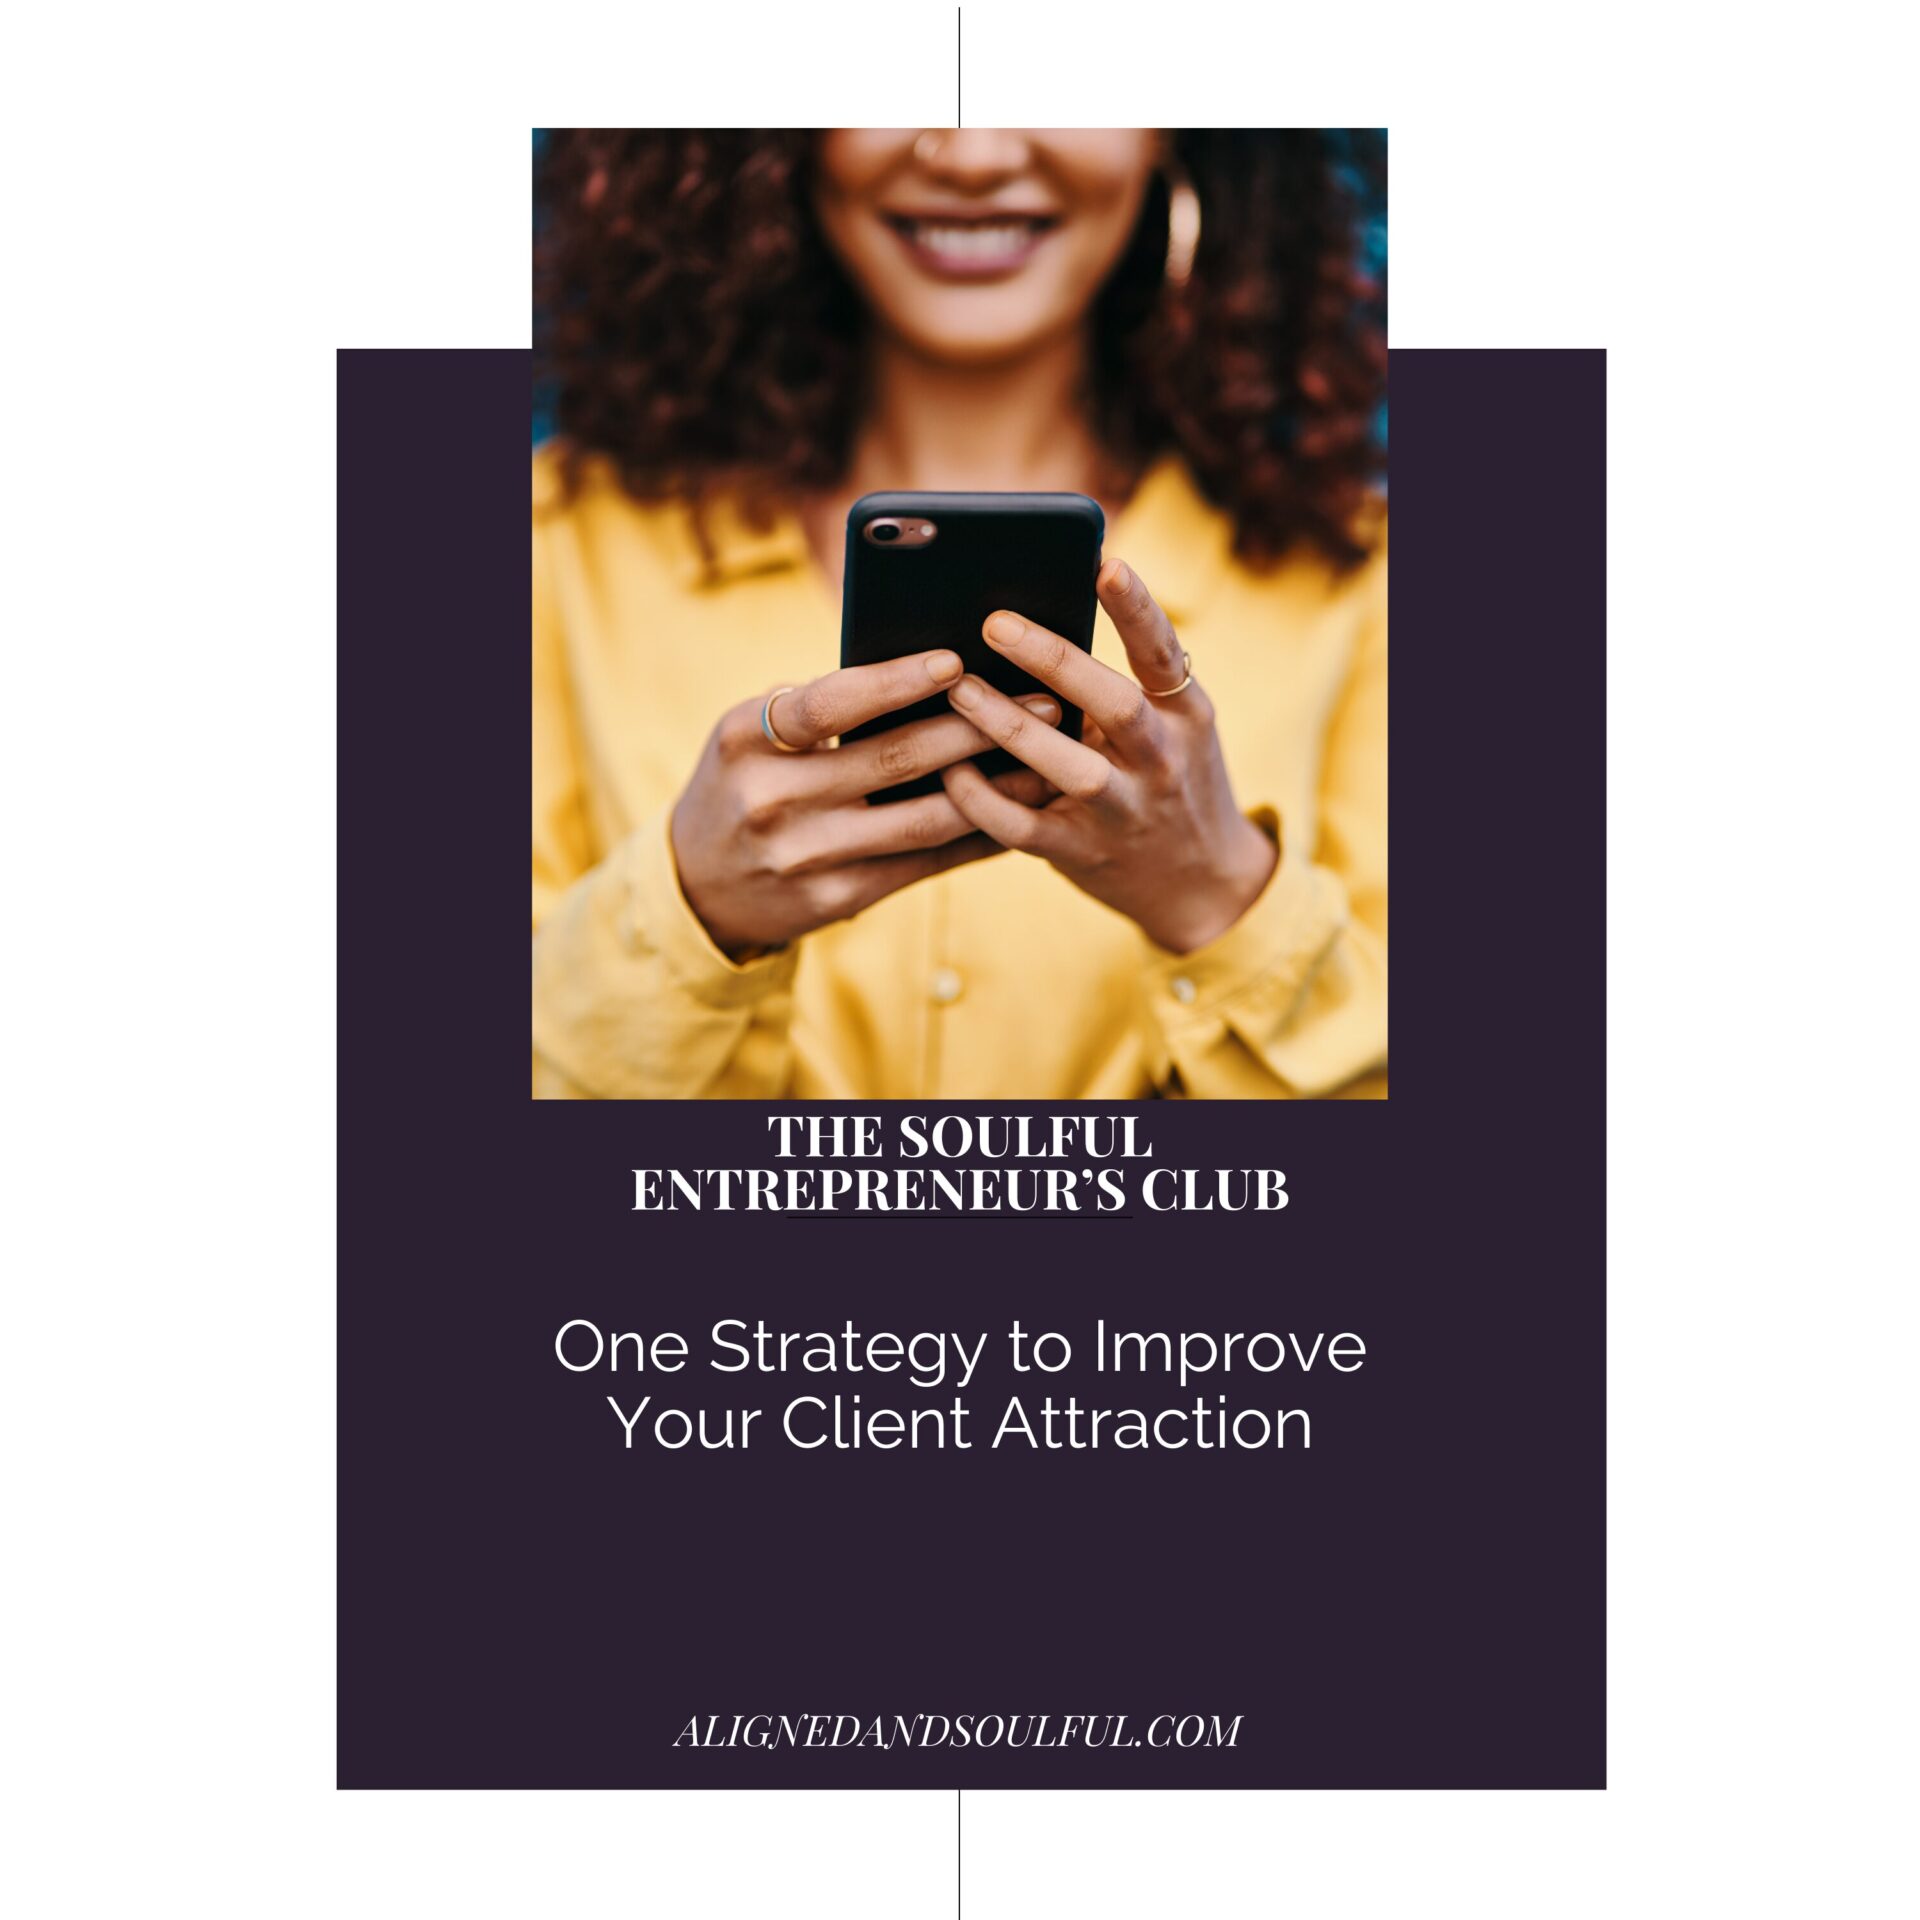 One Strategy to Improve Your Client Attraction